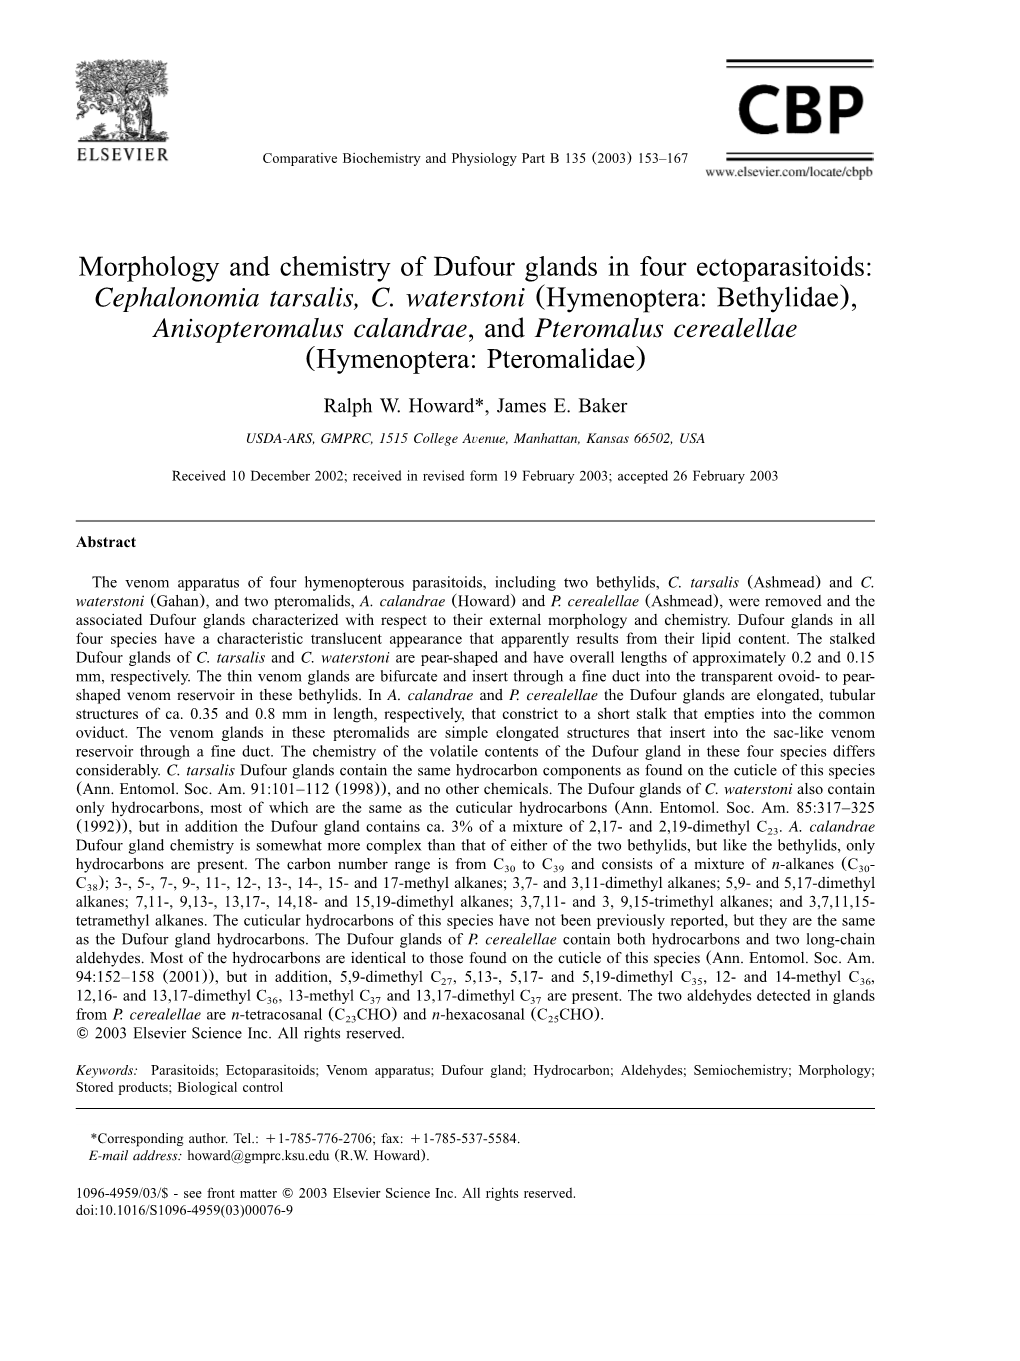 Morphology and Chemistry of Dufour Glands in Four Ectoparasitoids: Cephalonomia Tarsalis, C